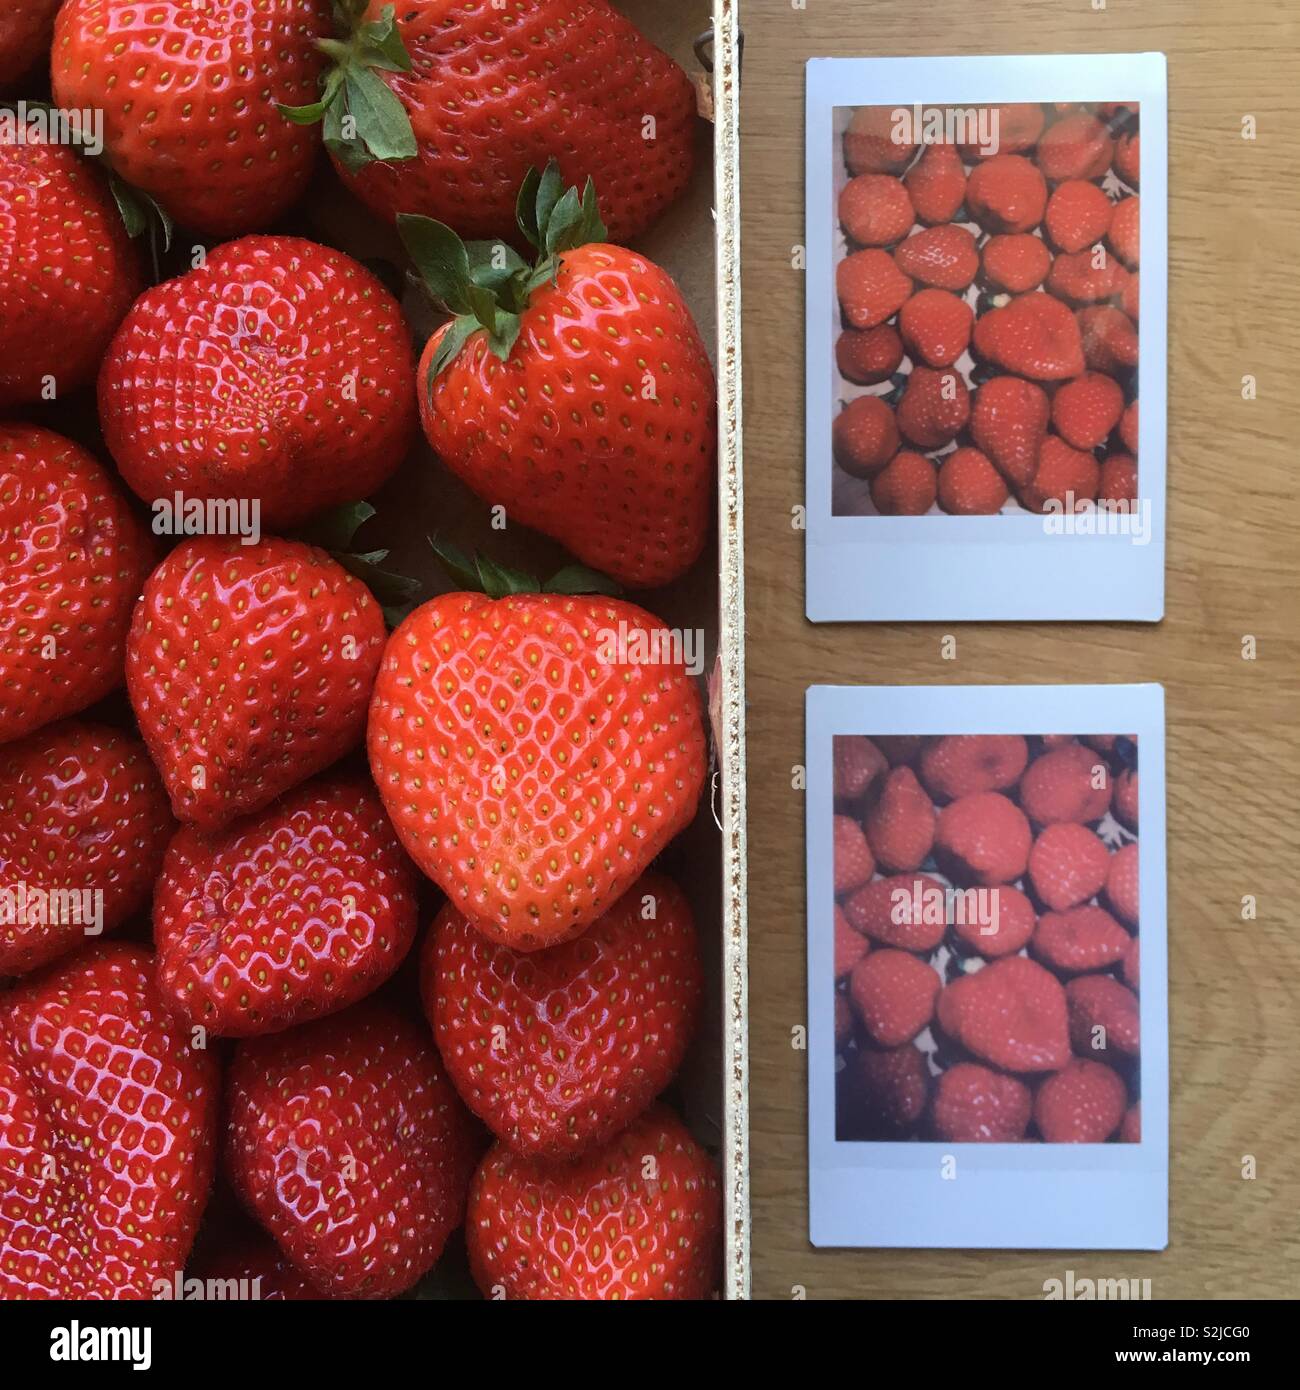 Strawberries and instant photos Stock Photo